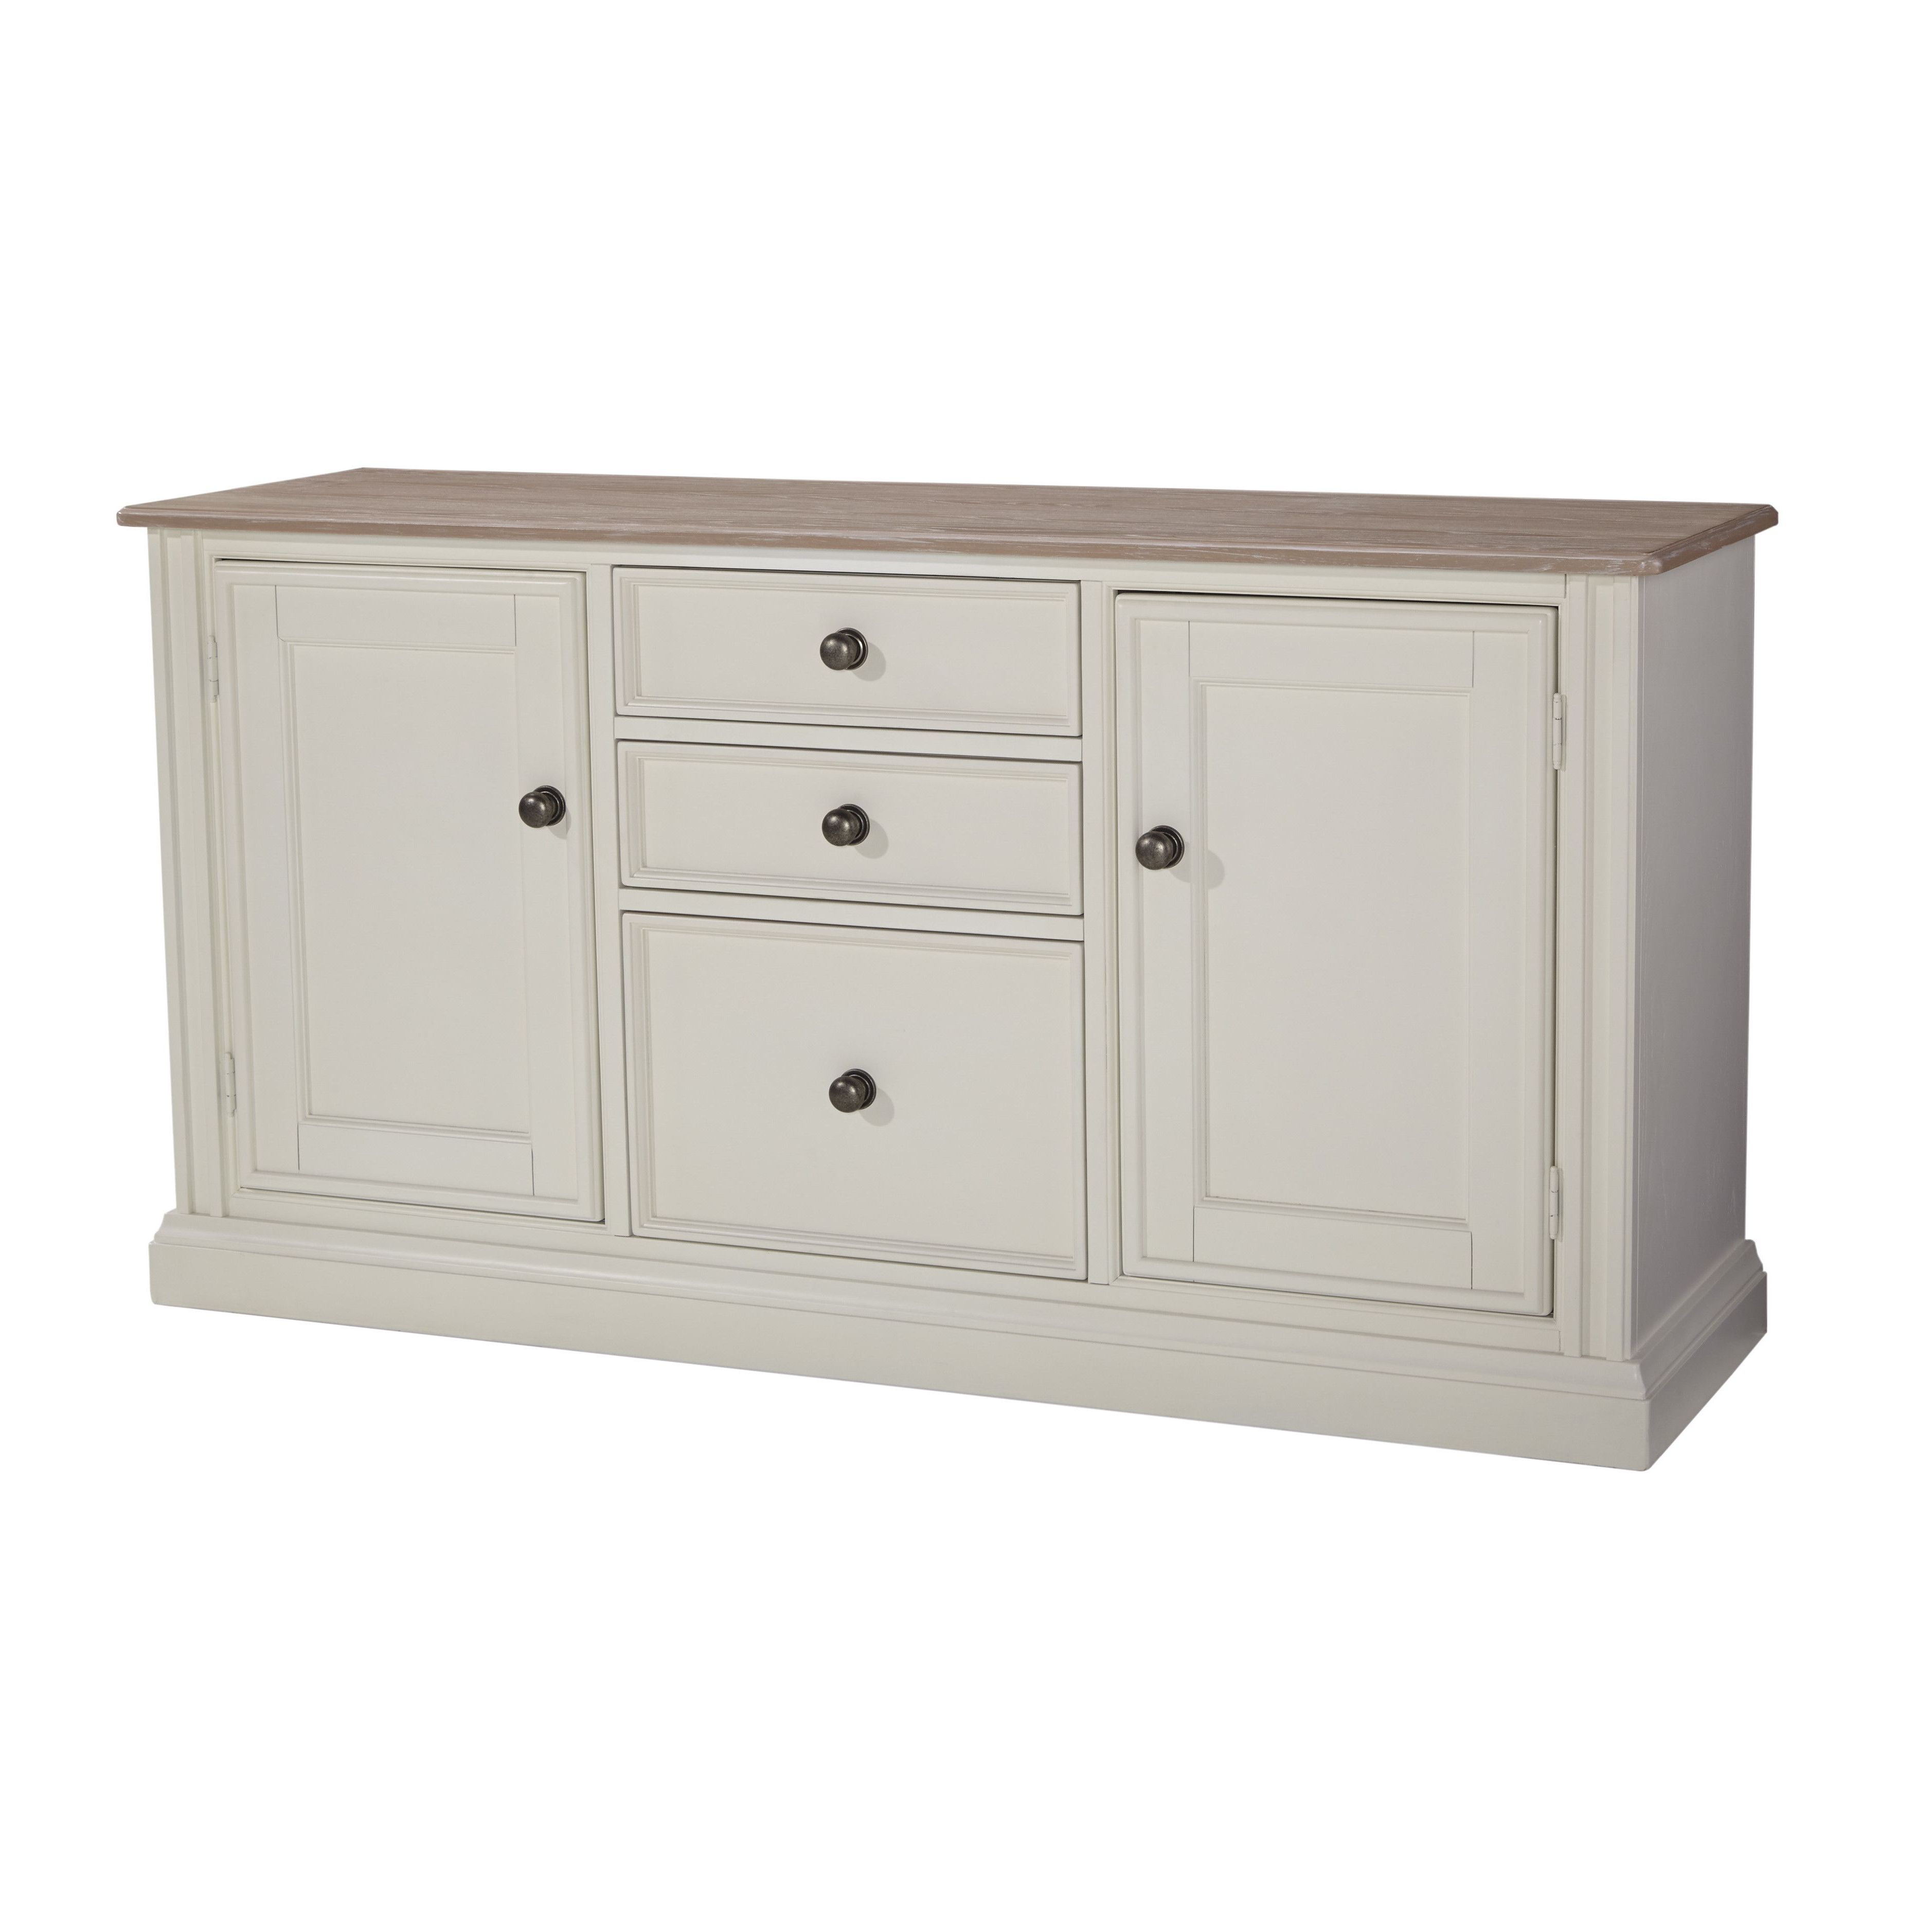 Large Sideboard, Sideboard Pertaining To Newest Amityville Sideboards (View 19 of 20)